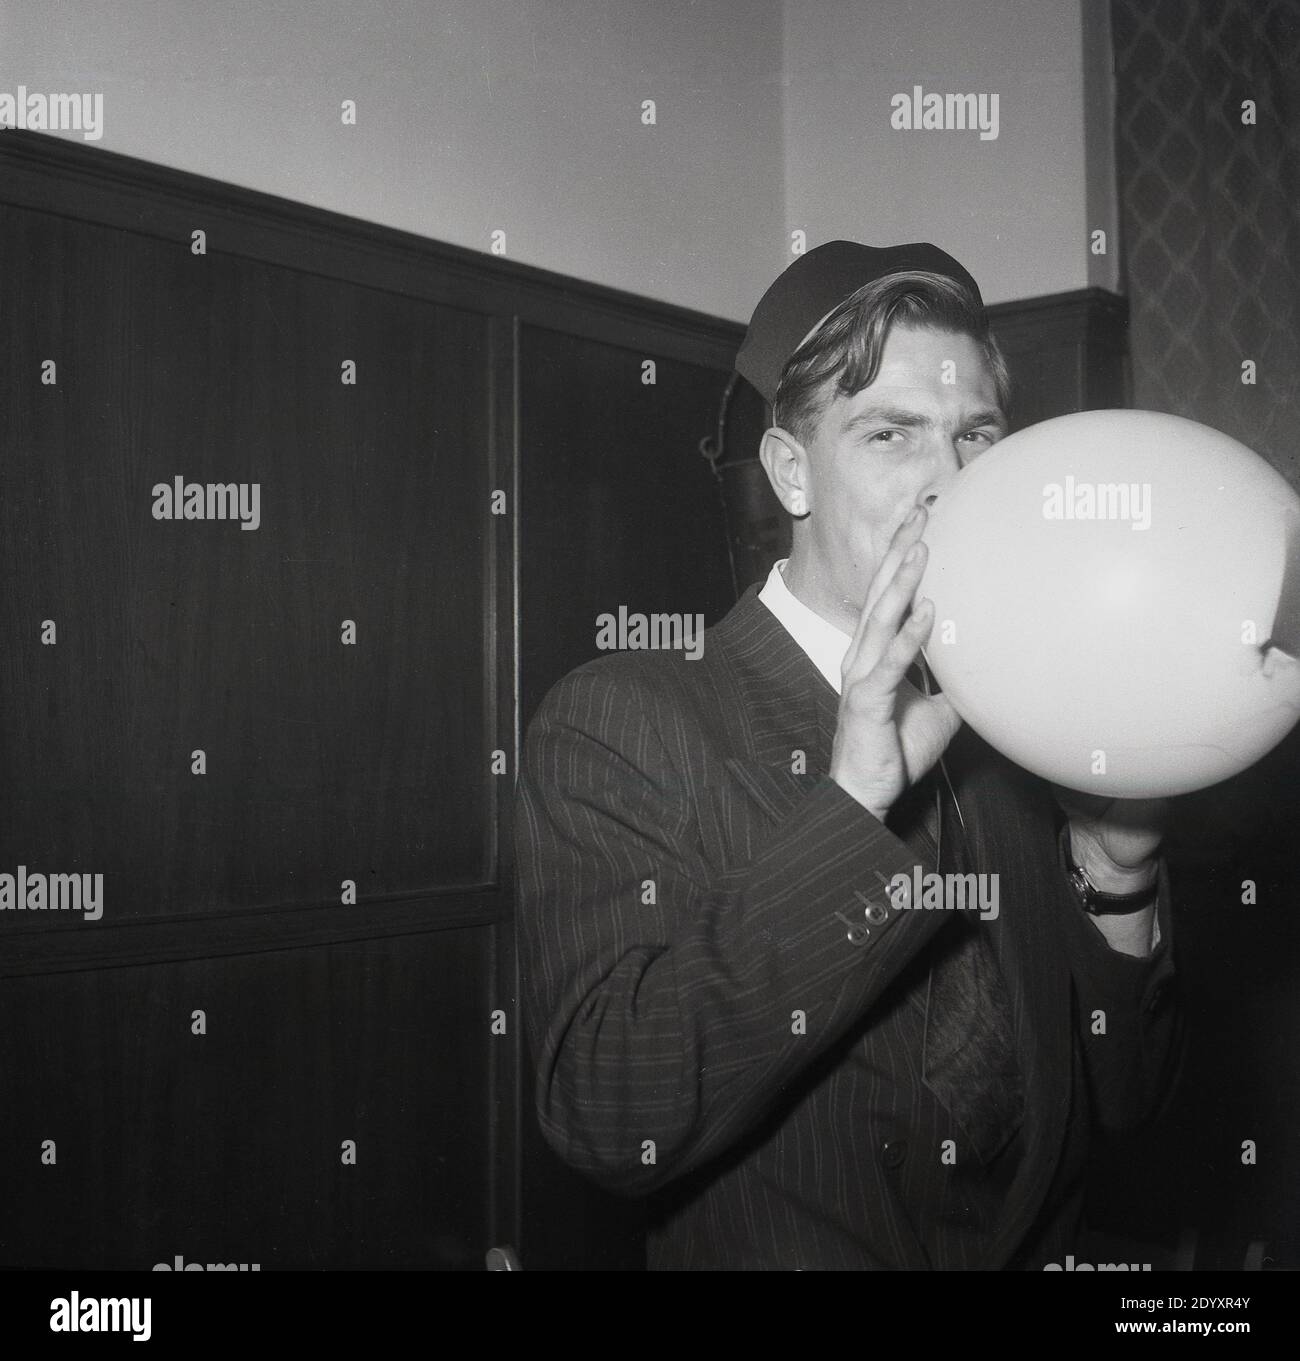 1950s, historical, party time....a man in a pinstripe suit and wearing a party hat in a function room blowing up a ballon, England, UK. Stock Photo